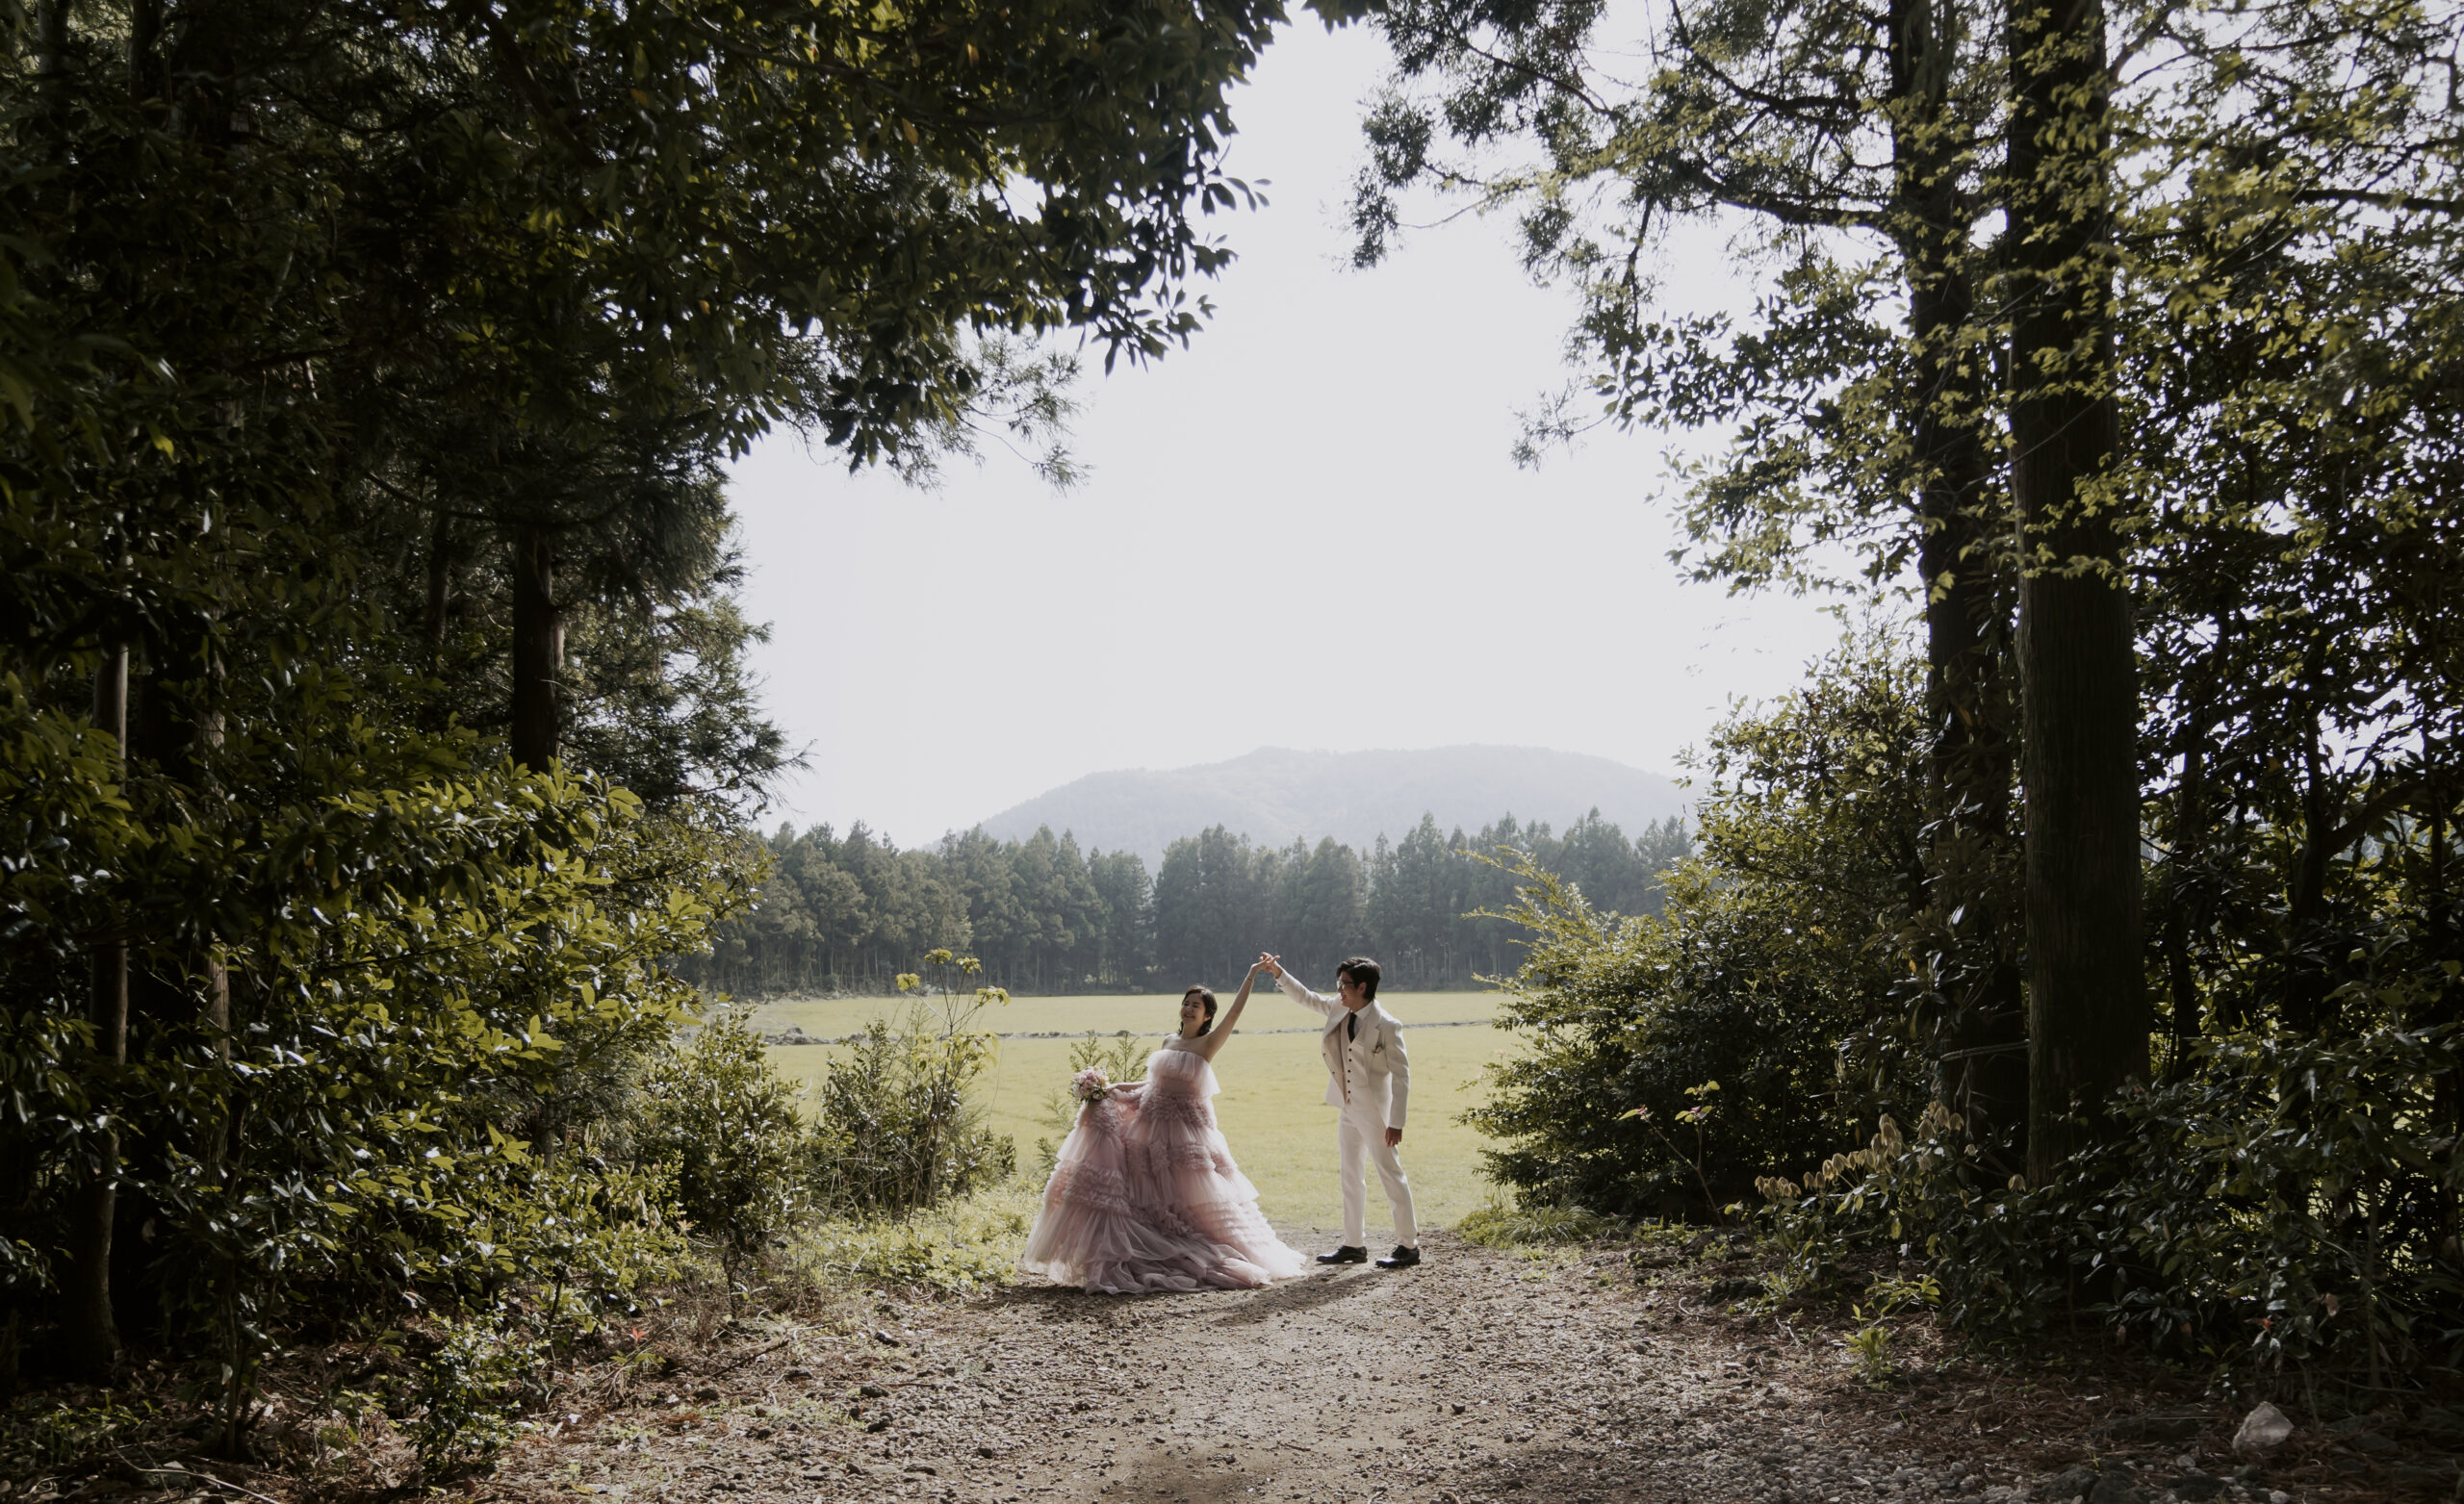 A bride and groom walking down a path in the woods.